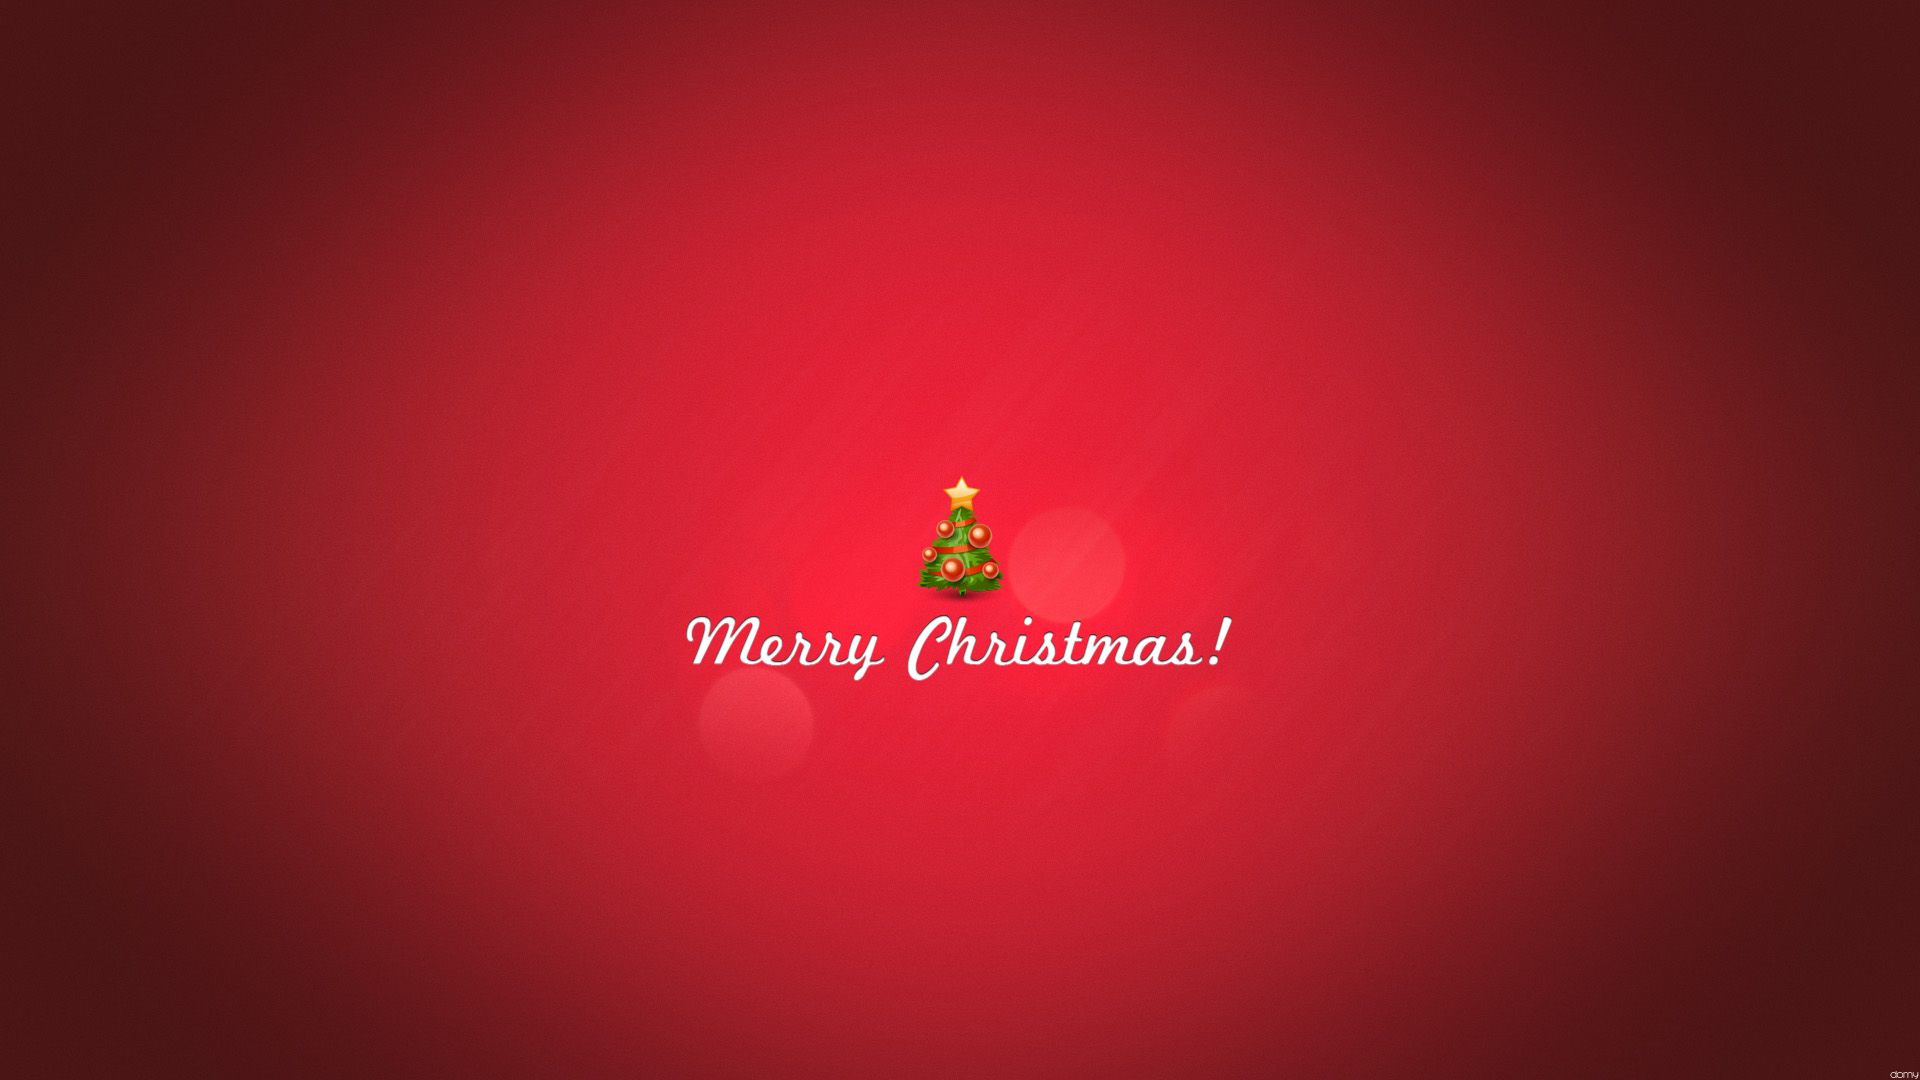 Merry Christmas Cover Photo For Facebook Timeline